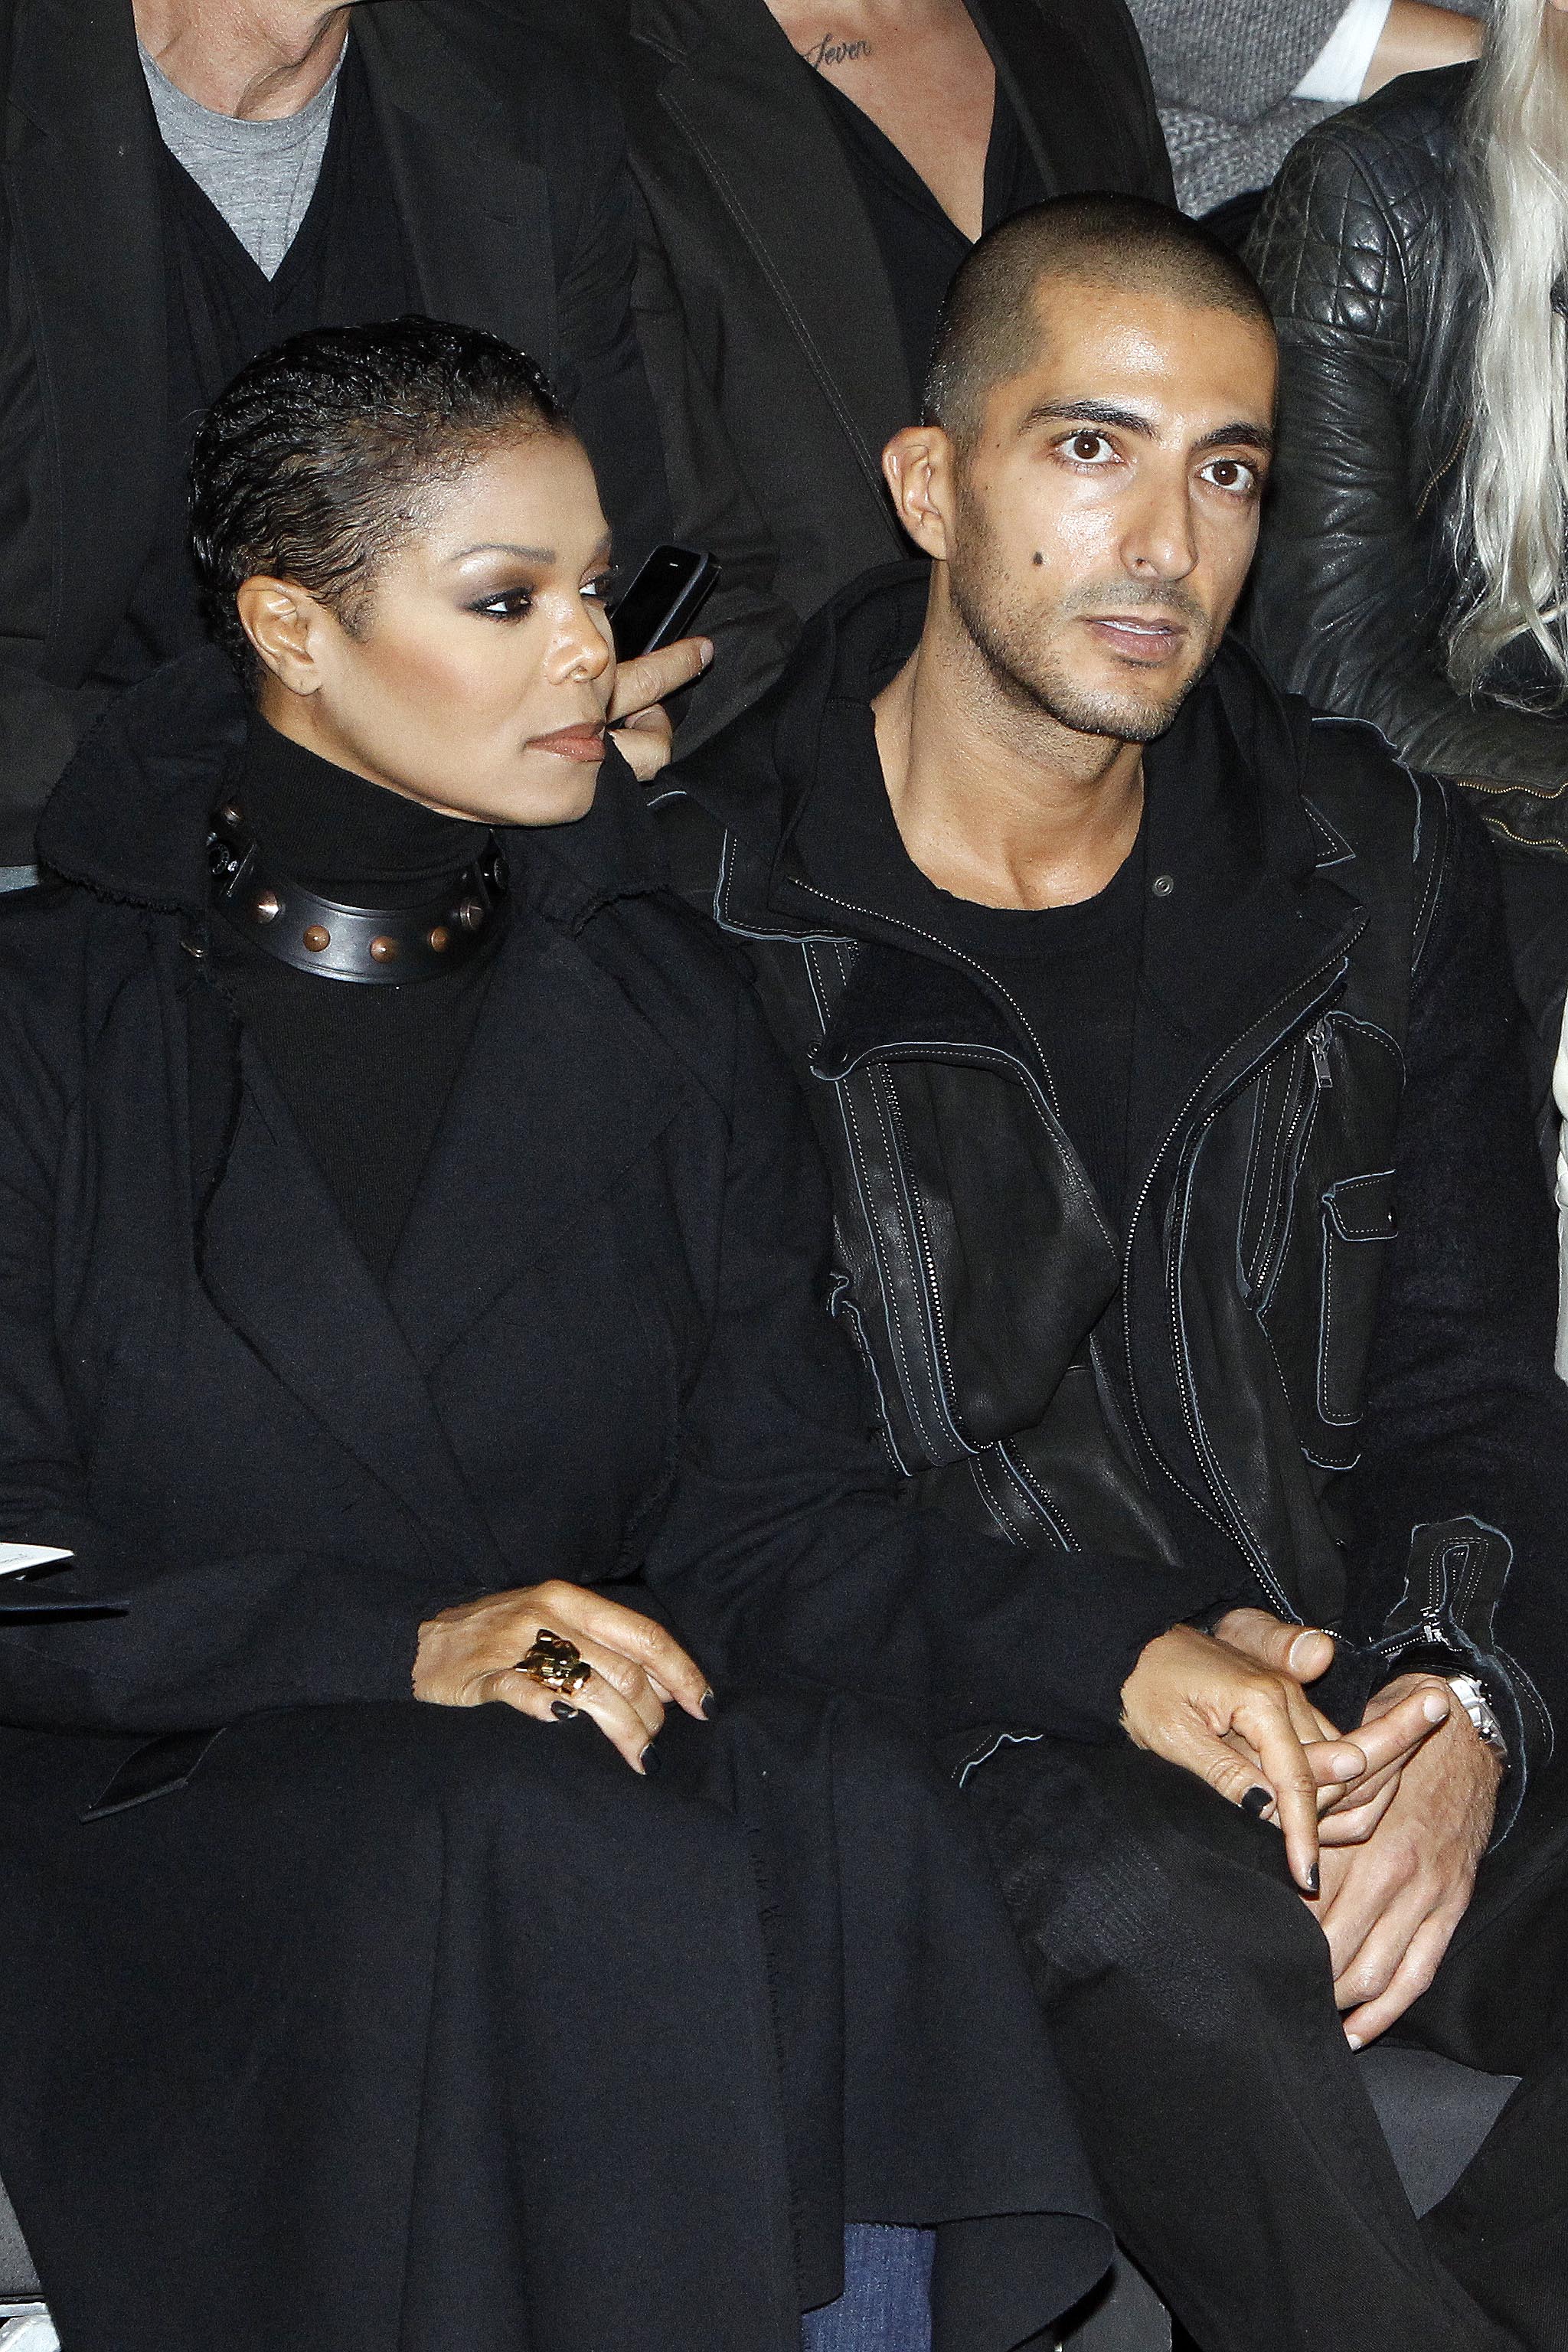 Janet Jackson and Wissam Al Mana attend the Lanvin Ready to Wear Spring/Summer 2011 show during Paris Fashion Week at Halle Freyssinet on October 1, 2010 in Paris, France. | Source: Getty Images